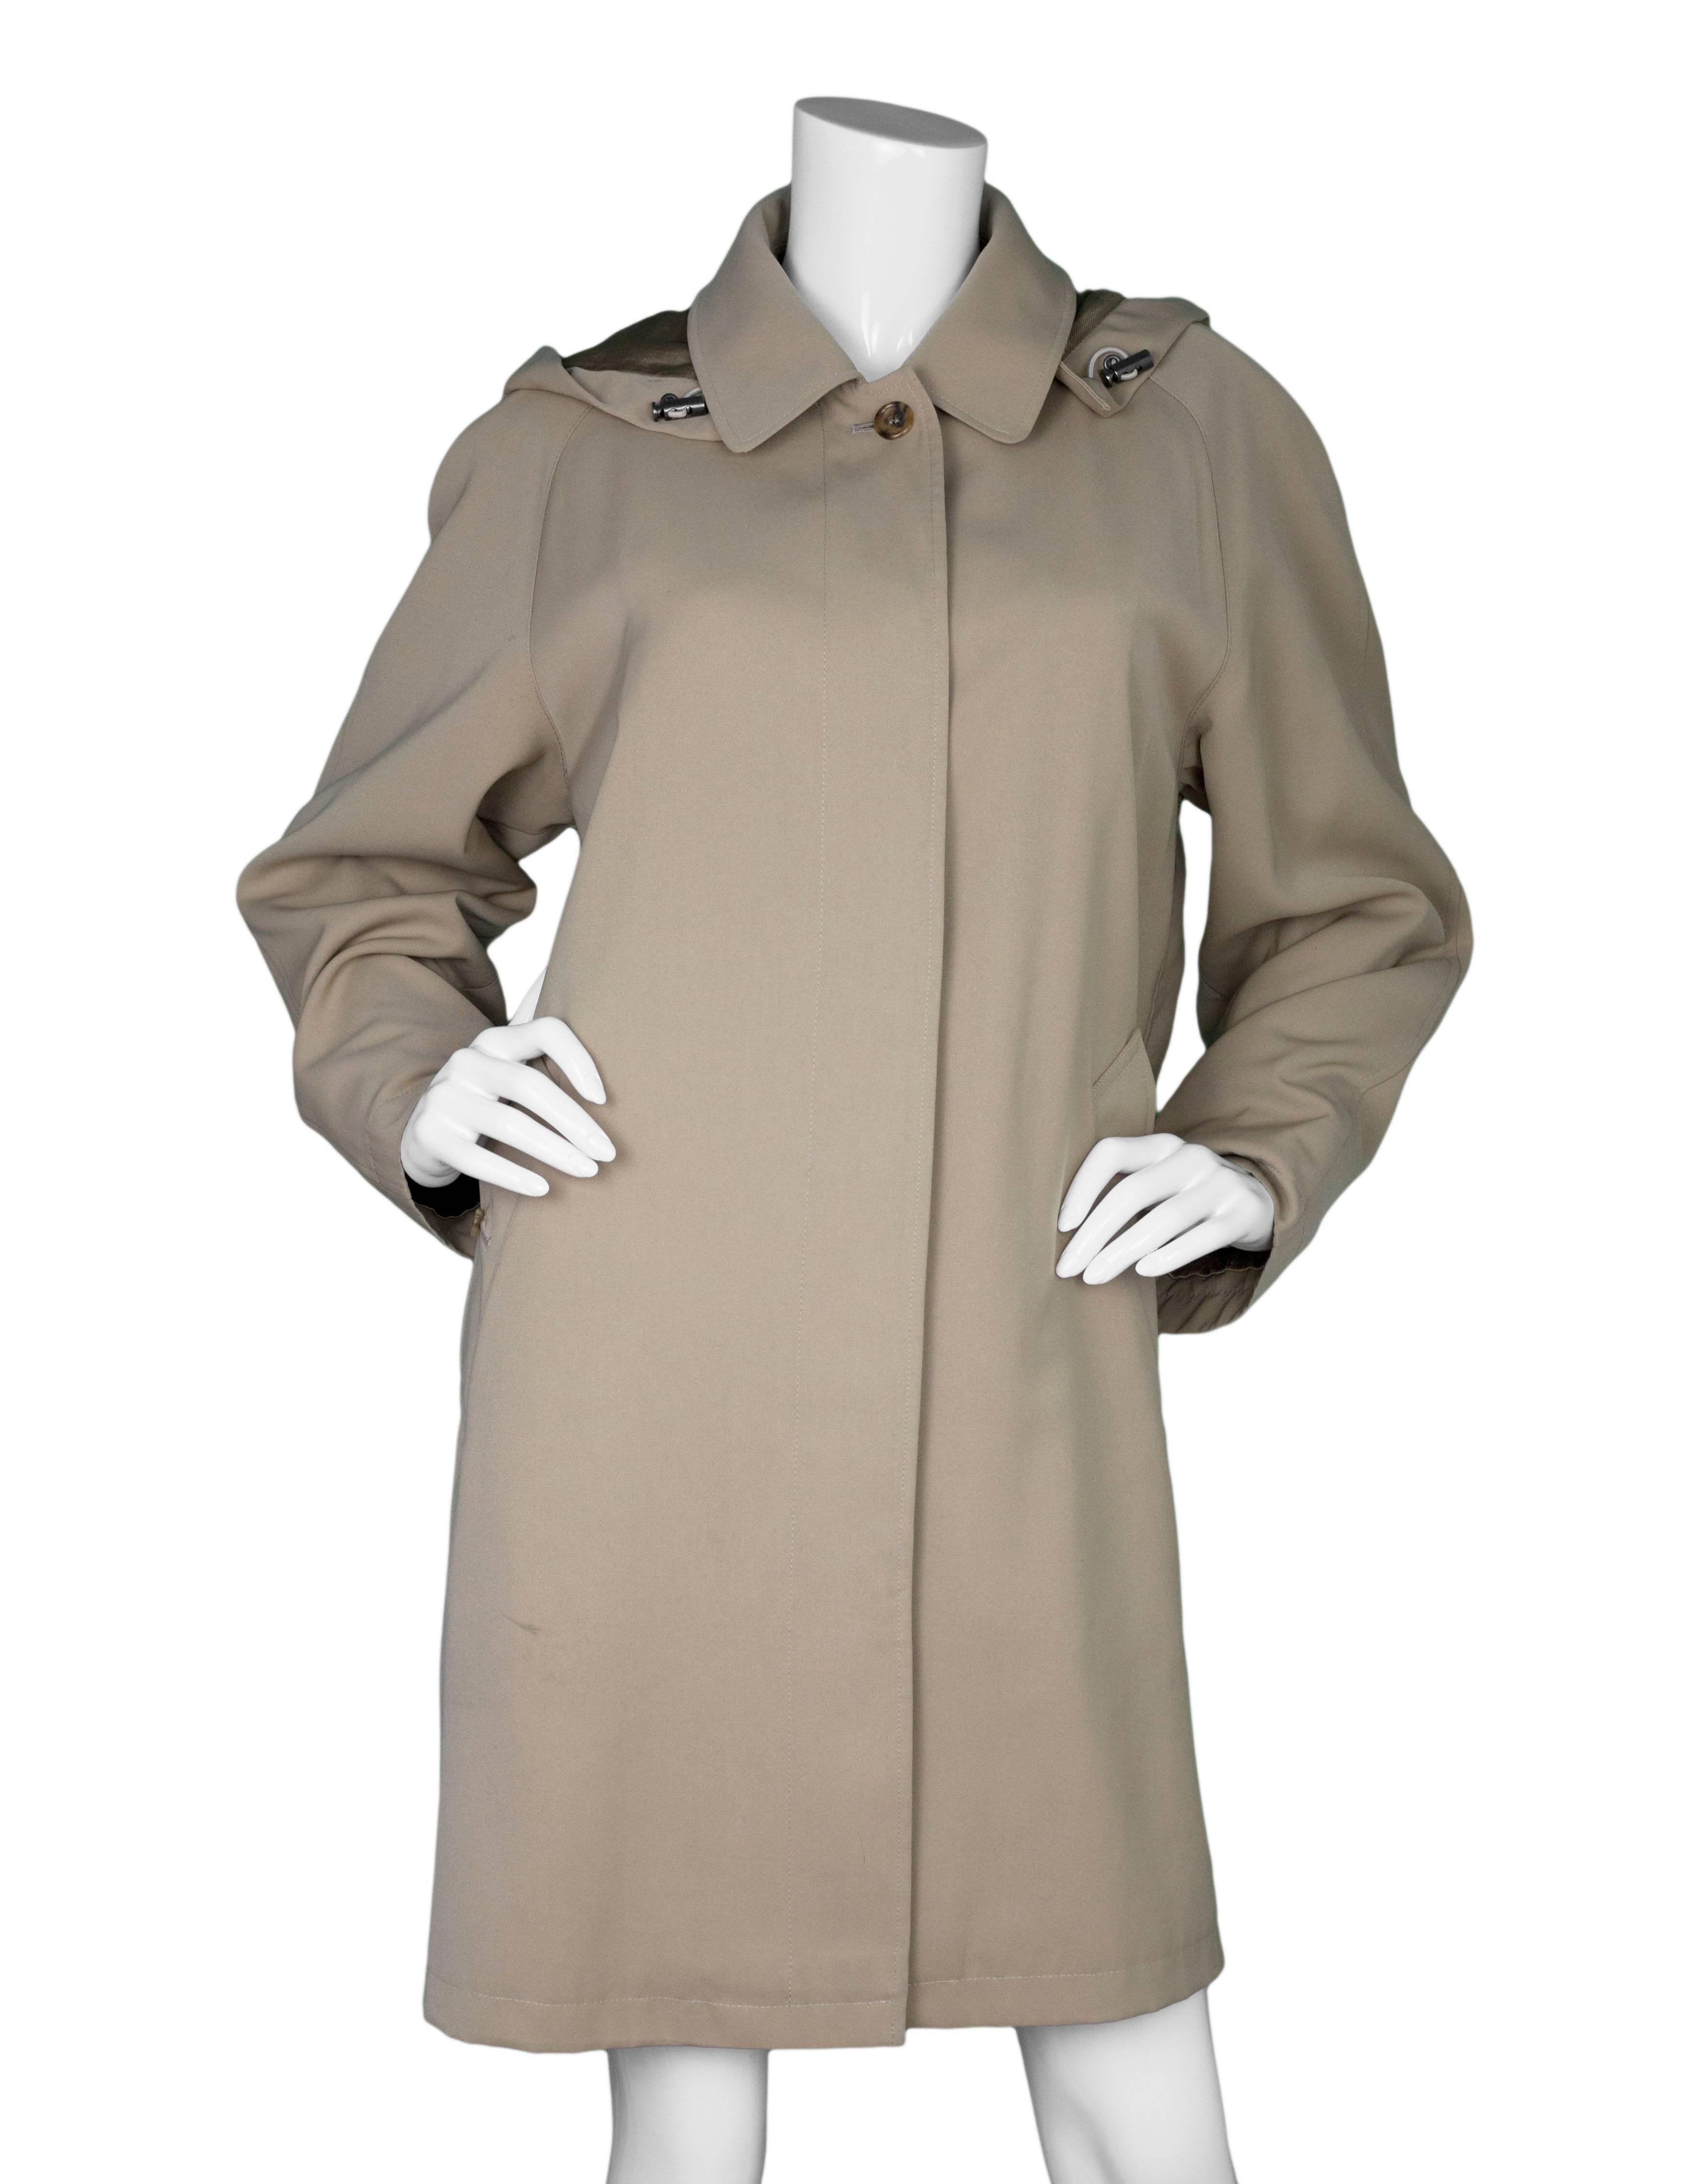 Burberry London Tan Trench Coat 
Features detachable button in hood and detachable zip around wool insert lining

Made In: 
Color: Tan
Composition: 100% polyester
Lining: Coat lining- 100% viscose, Insert Lining- 95% wool, 5% camel